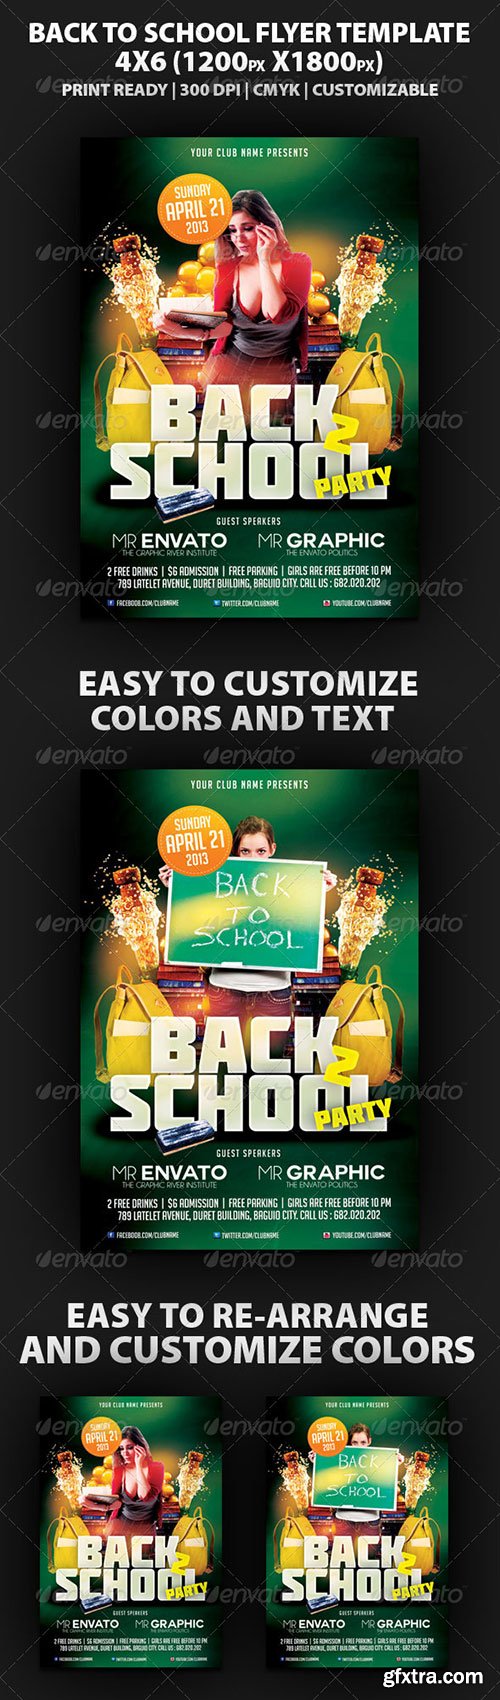 GraphicRiver - Back To School Party Flyer Template 4530953